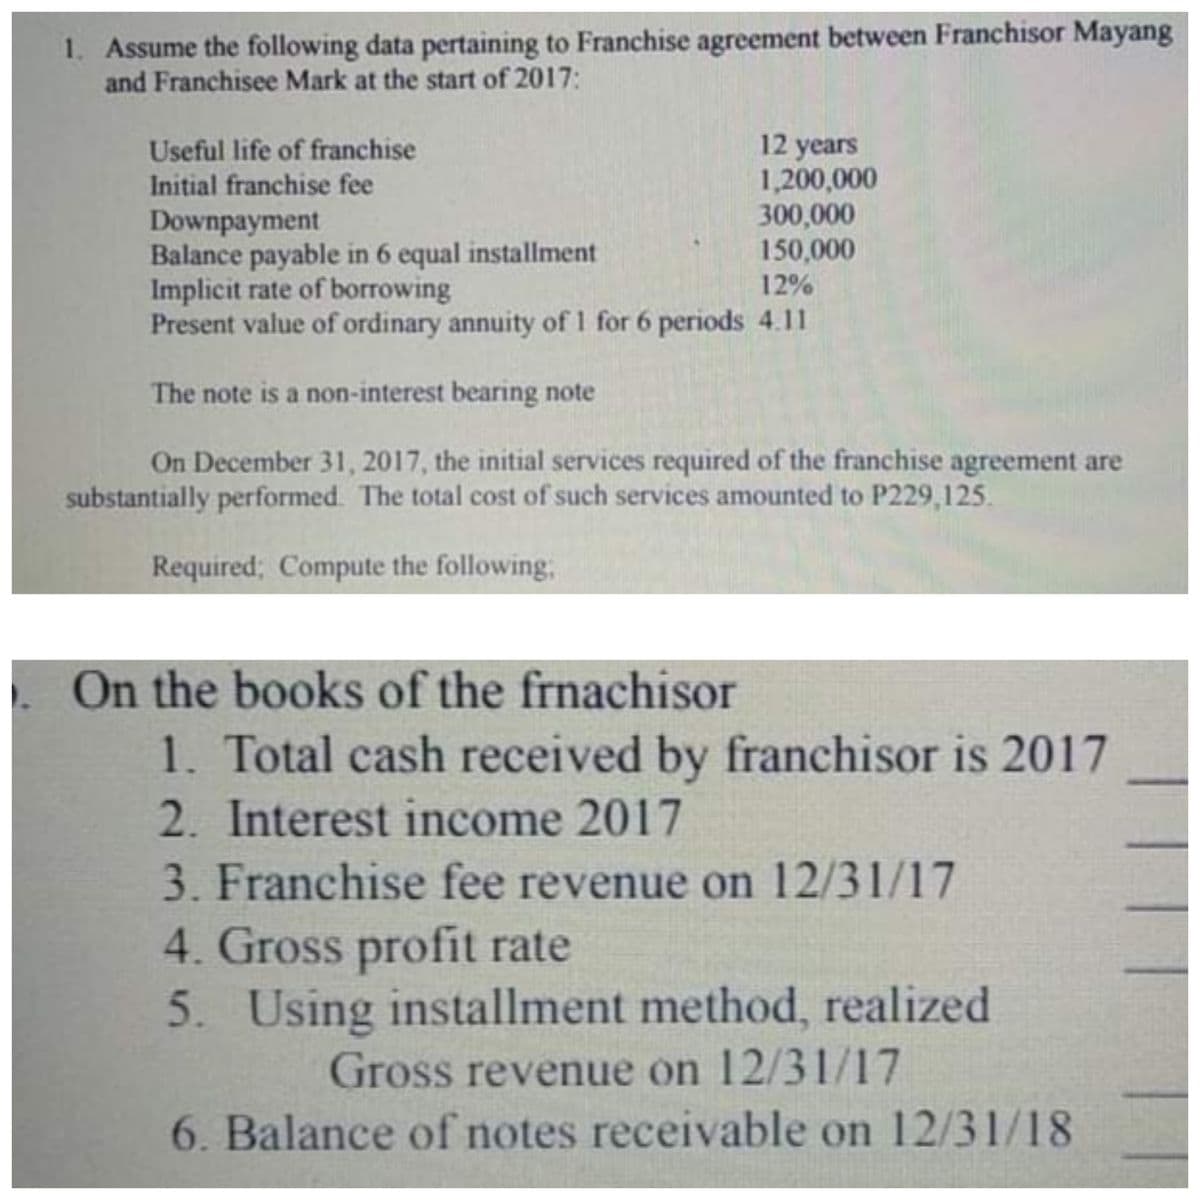 1. Assume the following data pertaining to Franchise agreement between Franchisor Mayang
and Franchisee Mark at the start of 2017:
12 years
1,200,000
300,000
150,000
Useful life of franchise
Initial franchise fee
Downpayment
Balance payable in 6 equal installment
Implicit rate of borrowing
Present value of ordinary annuity of 1 for 6 periods 4.11
12%
The note is a non-interest bearing note
On December 31, 2017, the initial services required of the franchise agreement are
substantially performed. The total cost of such services amounted to P229,125.
Required; Compute the following,
On the books of the frnachisor
1. Total cash received by franchisor is 2017
2. Interest income 2017
3. Franchise fee revenue on 12/31/17
4. Gross profit rate
5. Using installment method, realized
Gross revenue on 12/31/17
6. Balance of notes receivable on 12/31/18
